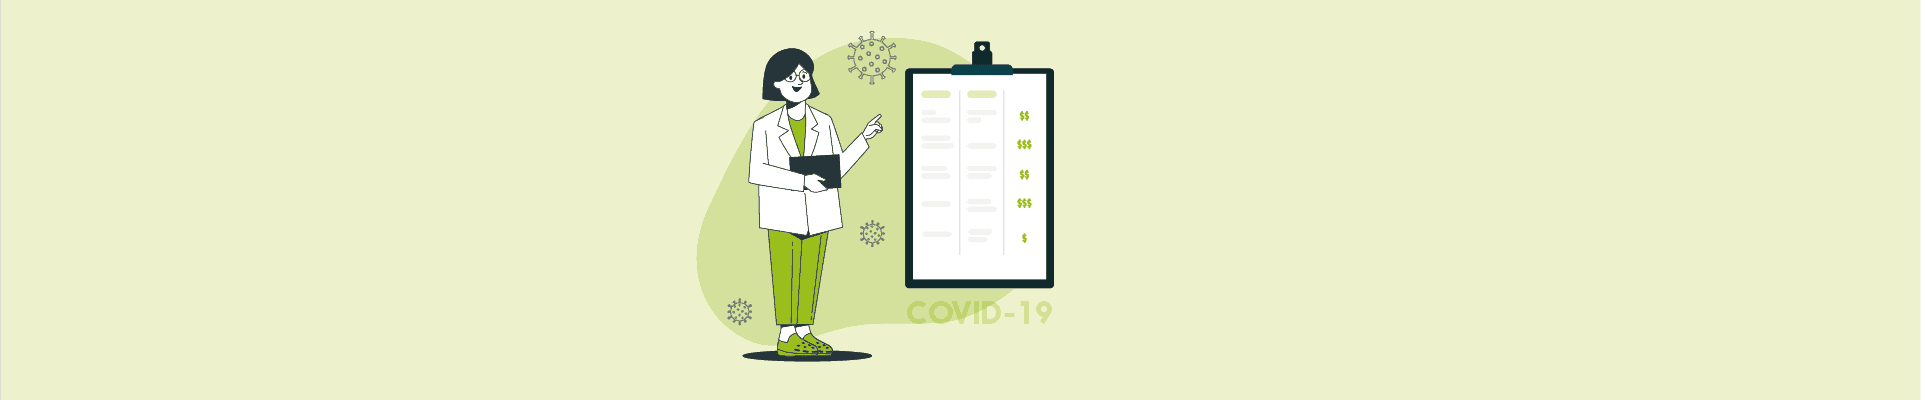 EHR Pricing Updated for COVID-19